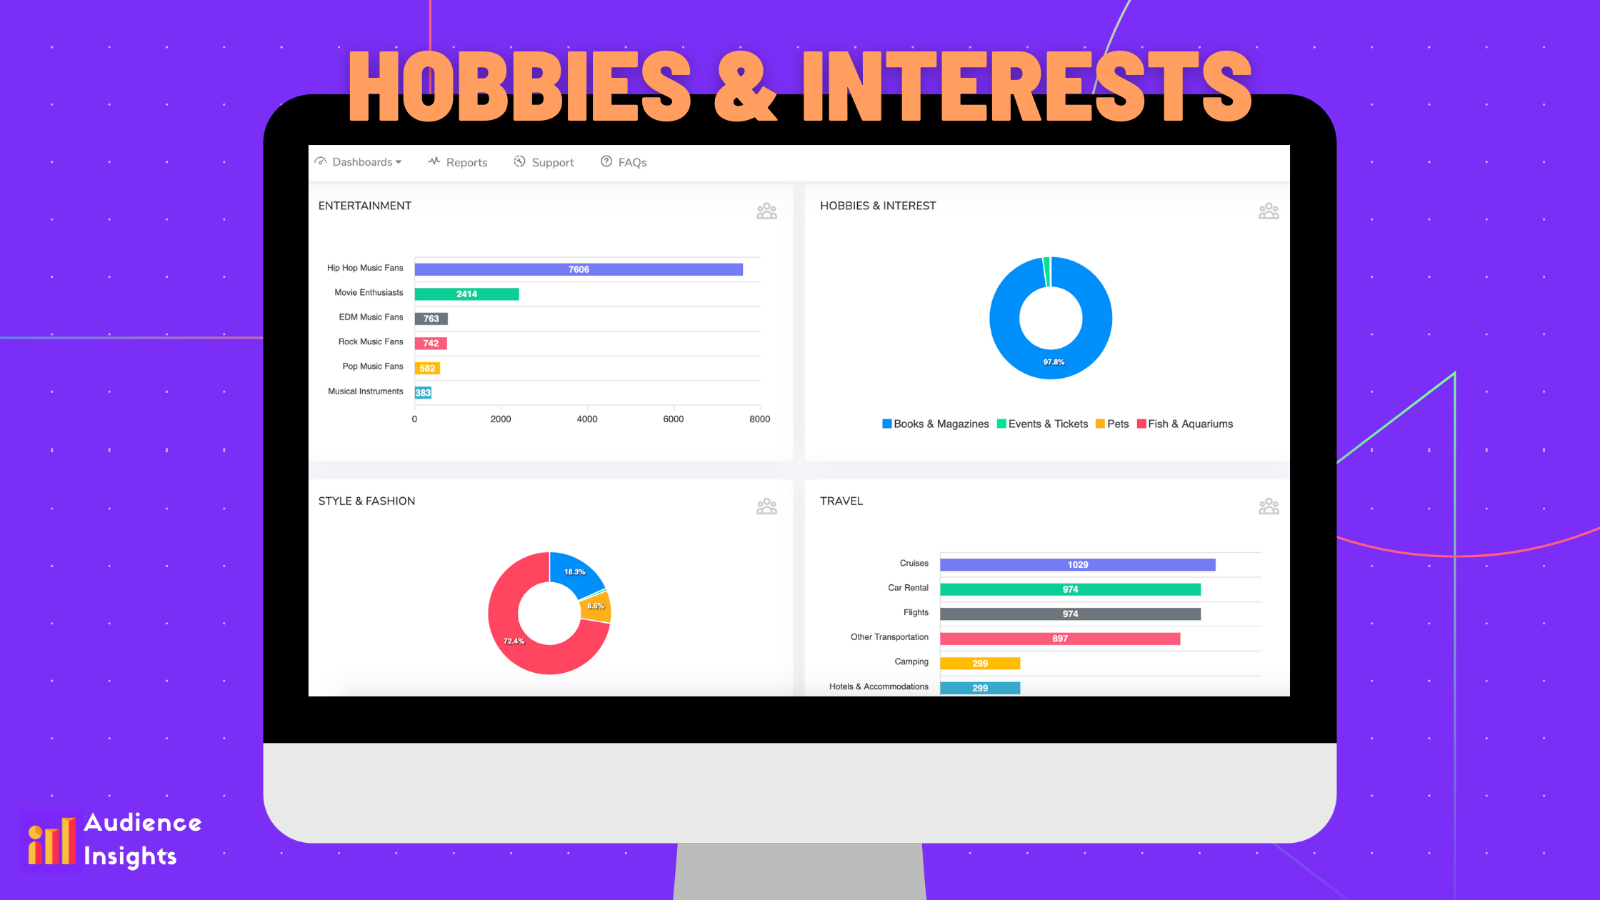 Uncover the interests and hobbies of your shoppers